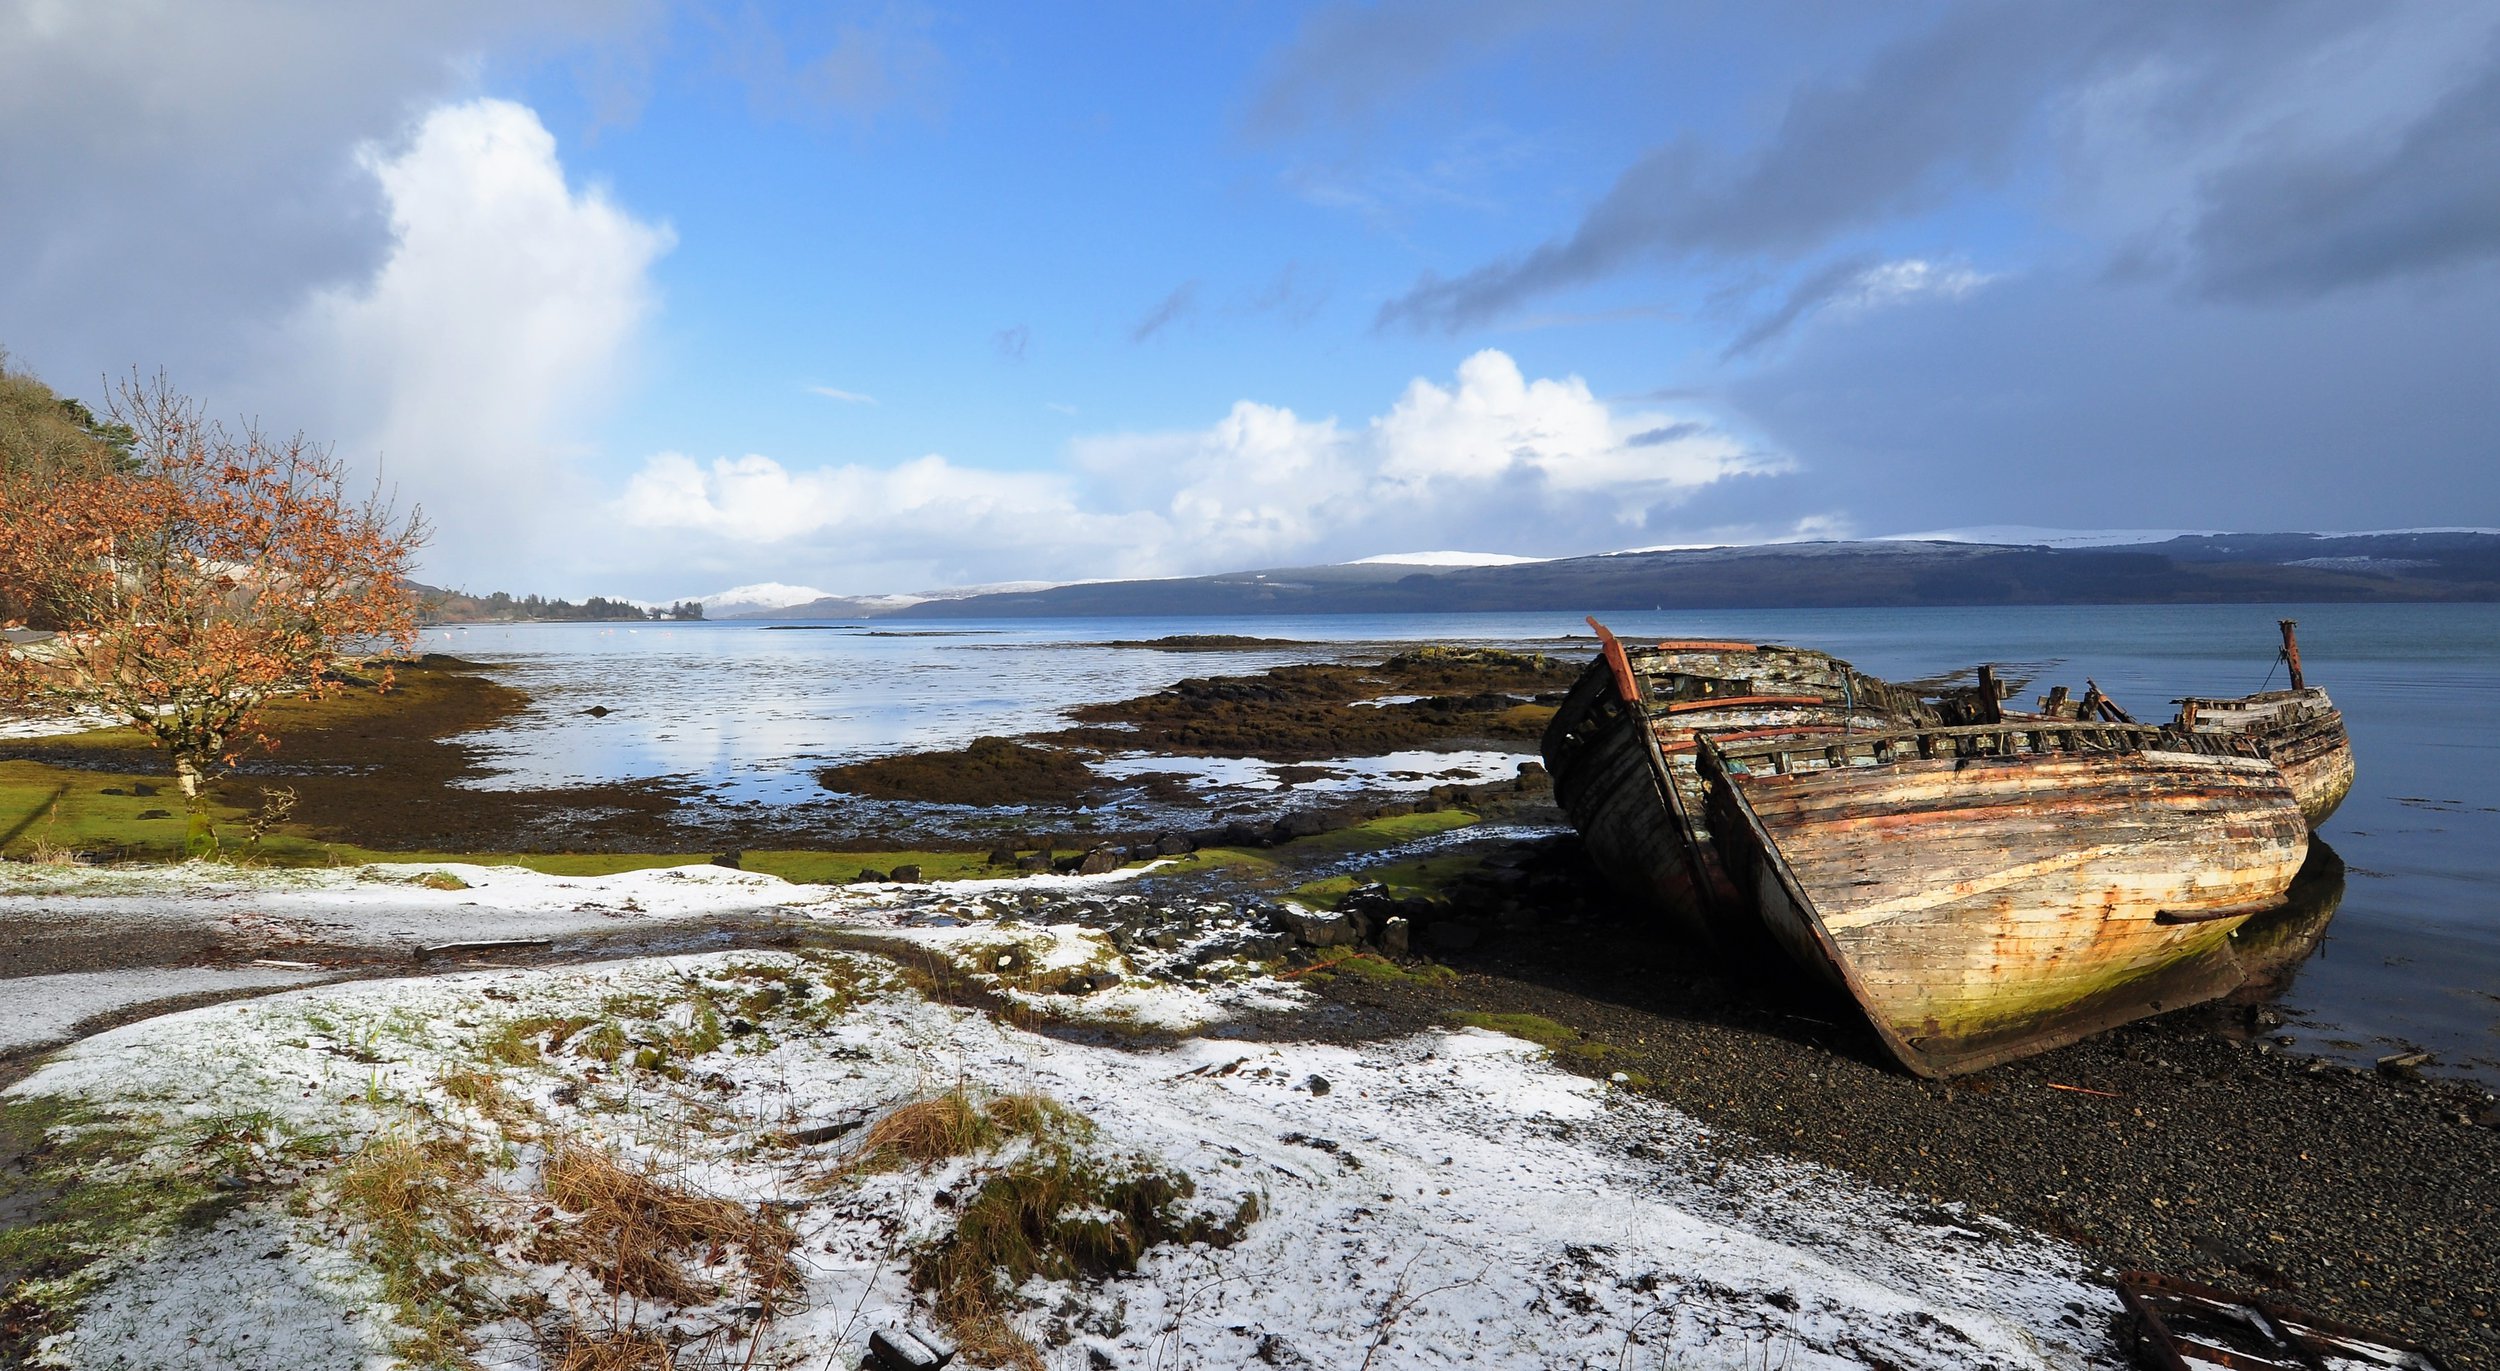 Old boats on the Isle of Mull